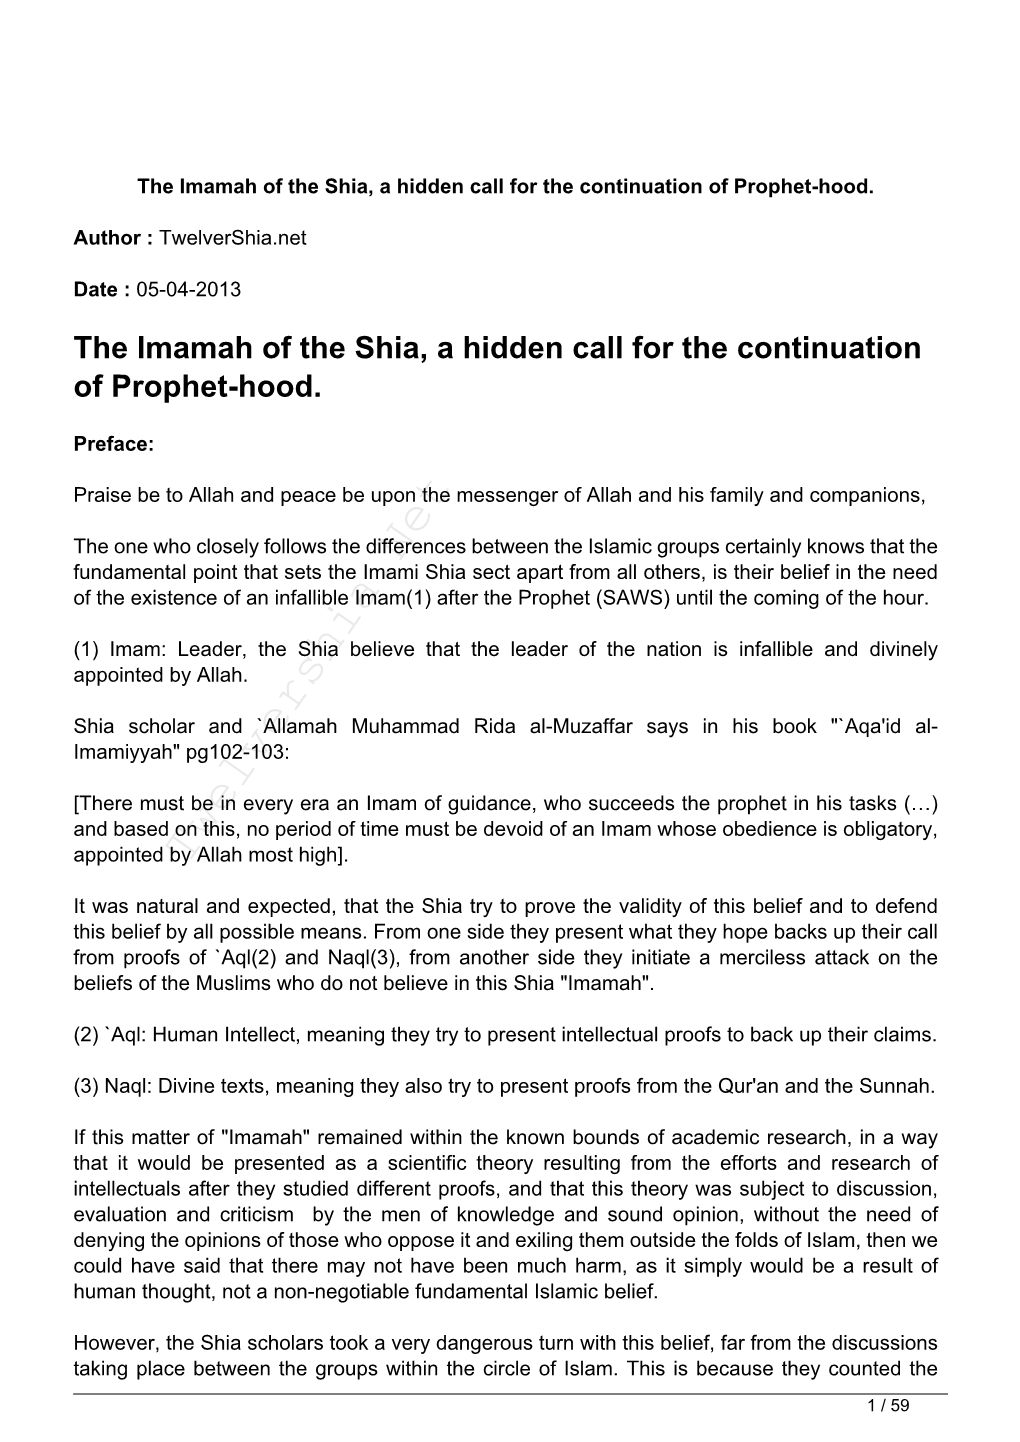 The Imamah of the Shia, a Hidden Call for the Continuation of Prophet-Hood